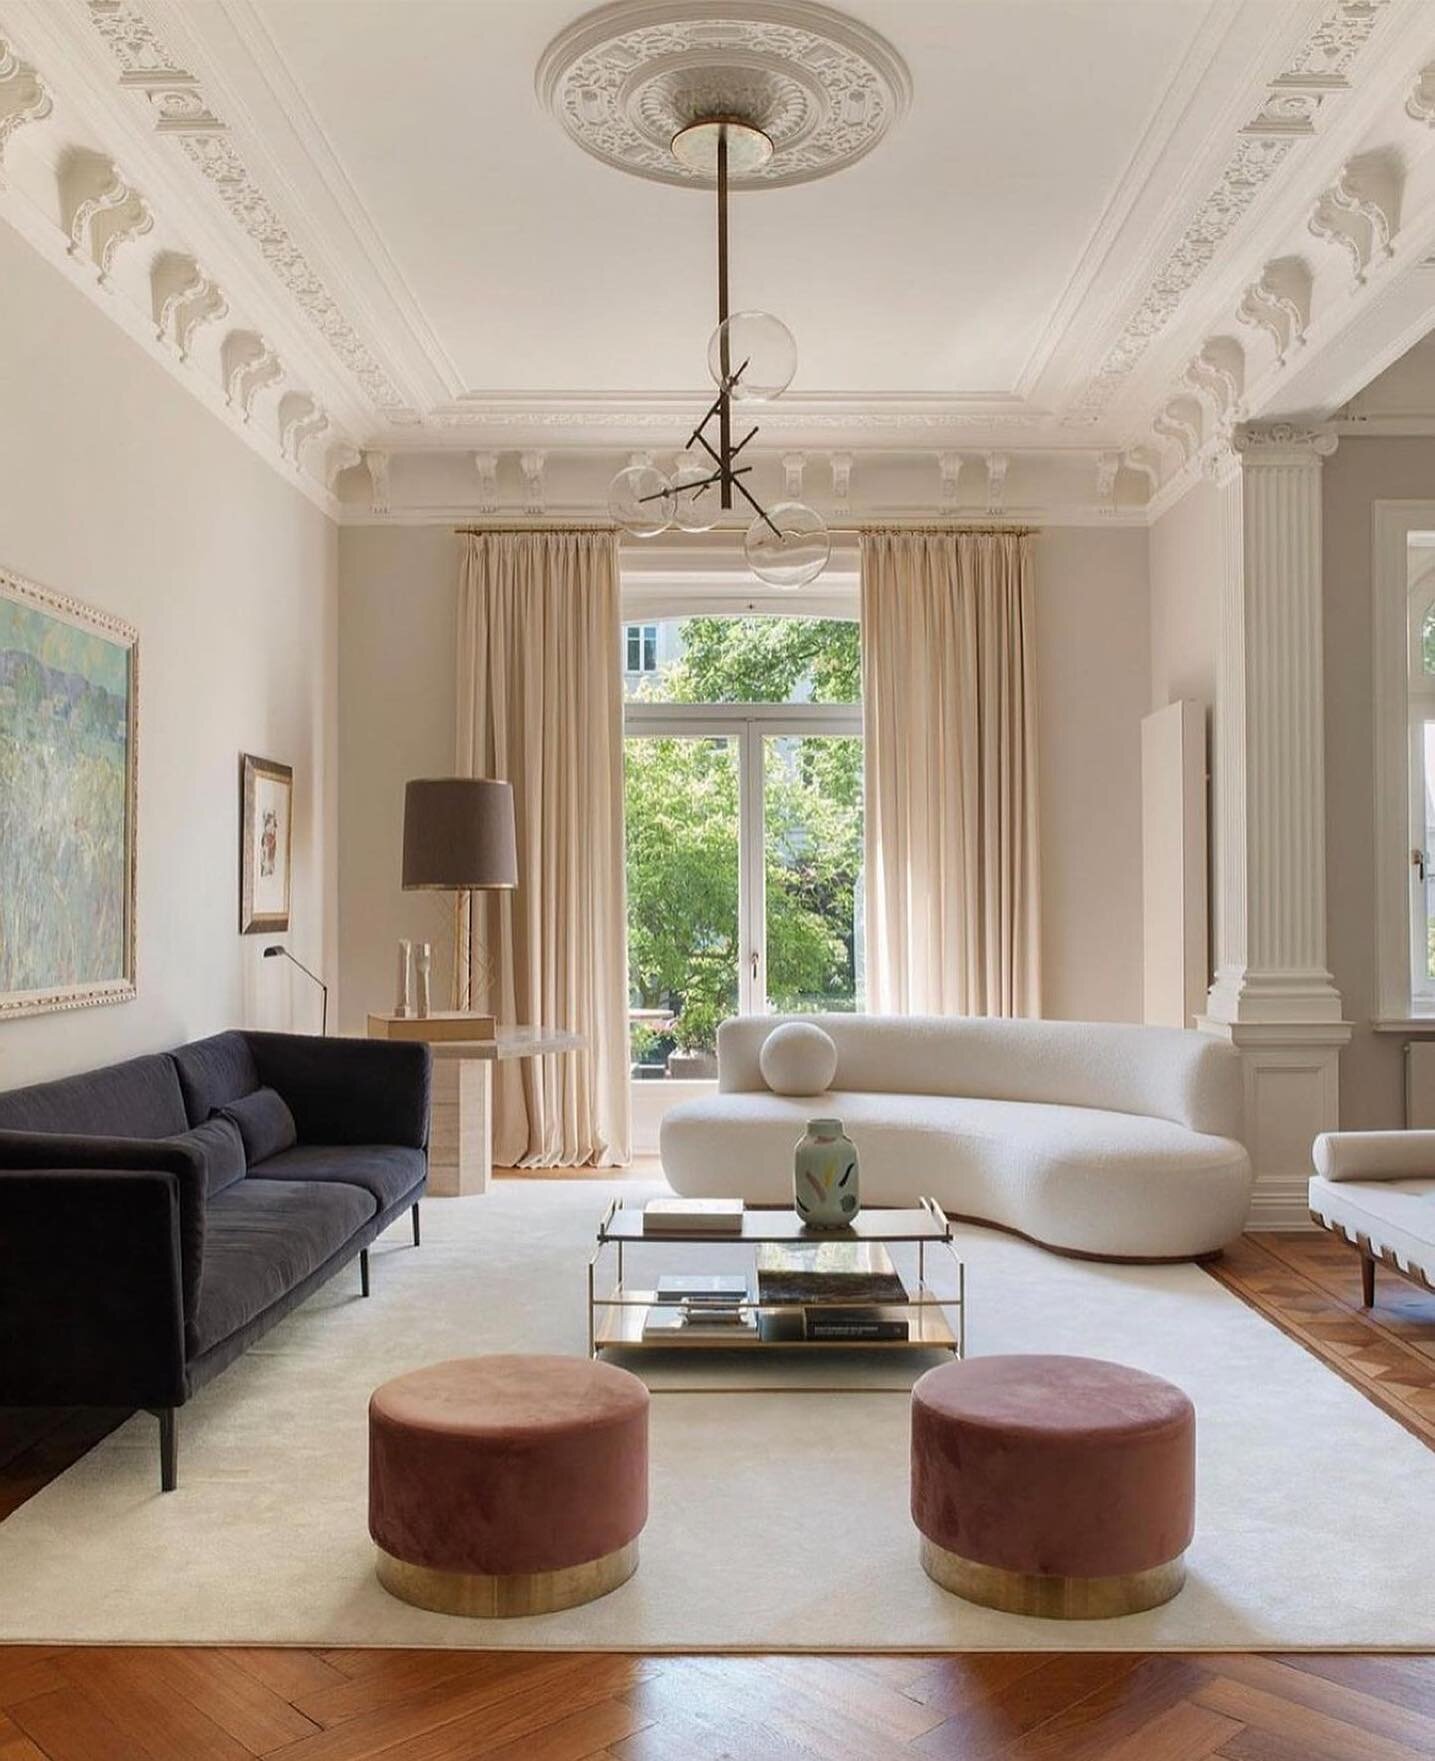 INSPIRATION \\ Just can&rsquo;t get enough of the play on traditional and modern! Look at that crown molding 😍 via @emdesigninc
&bull;
Beautiful interiors by the multi-disciplinary Madrid firm @estudiomariasantos 
.
#designinspiration #designinspo #